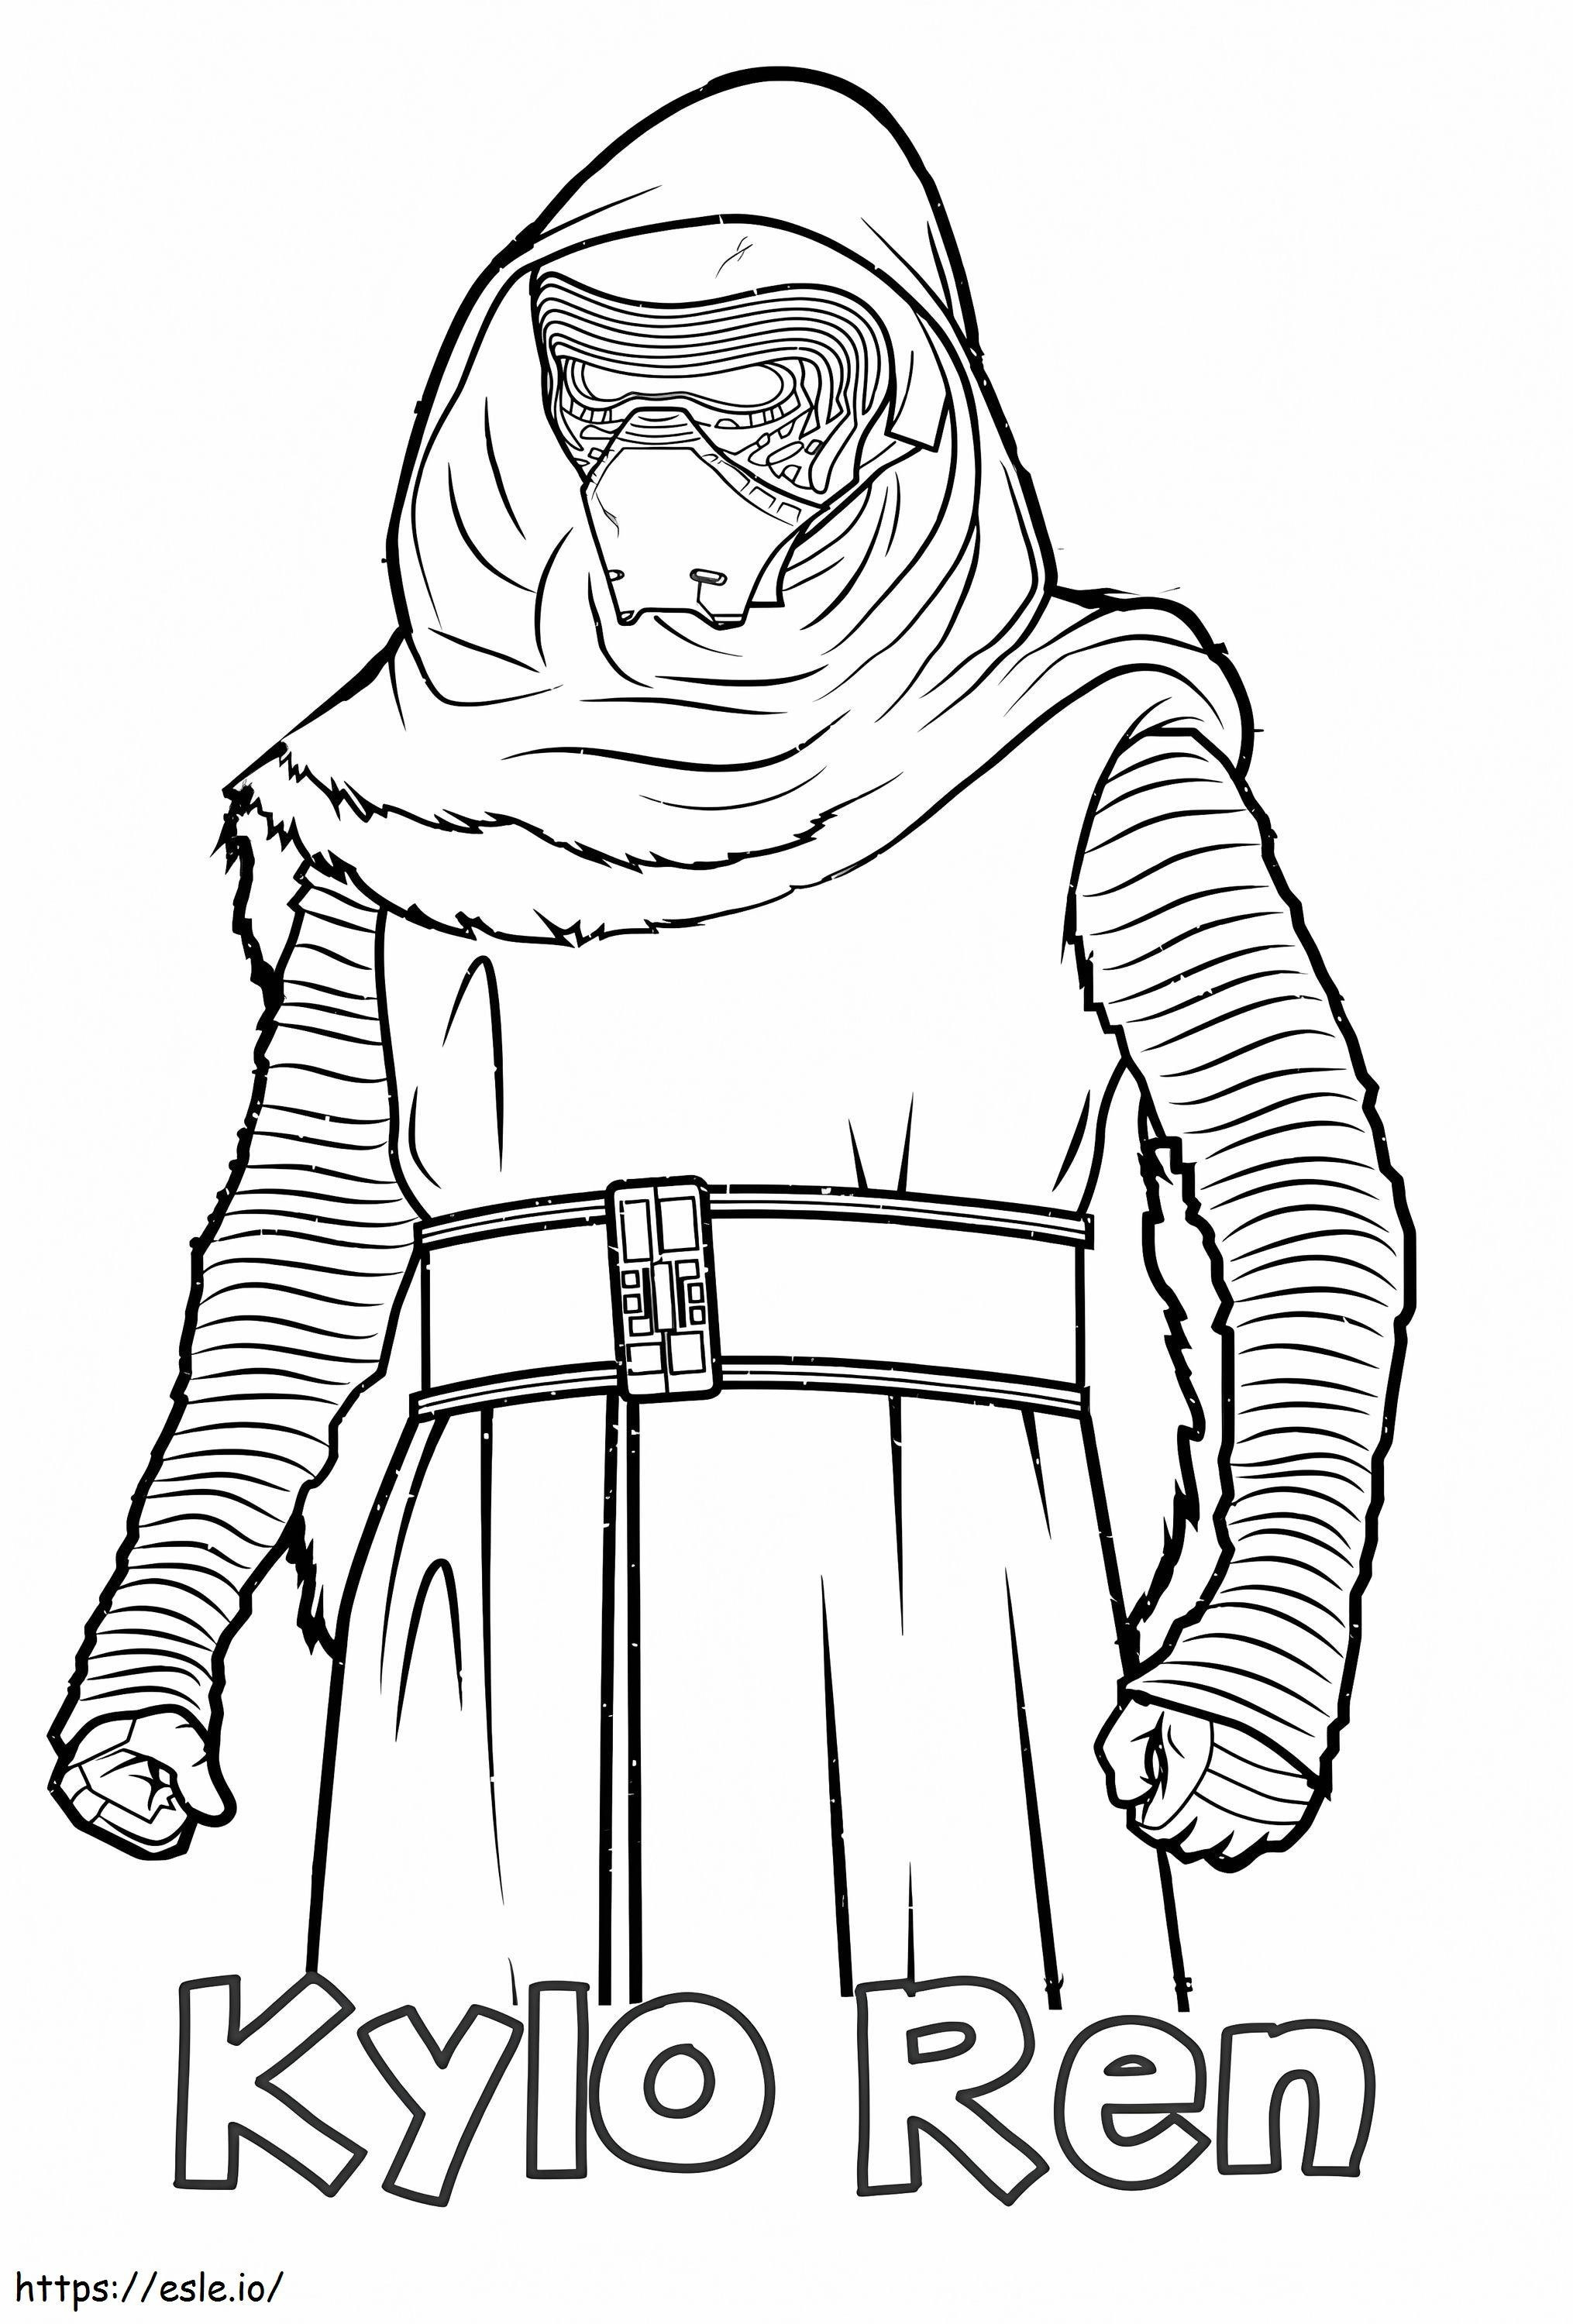 Cool Kylo Ren coloring page